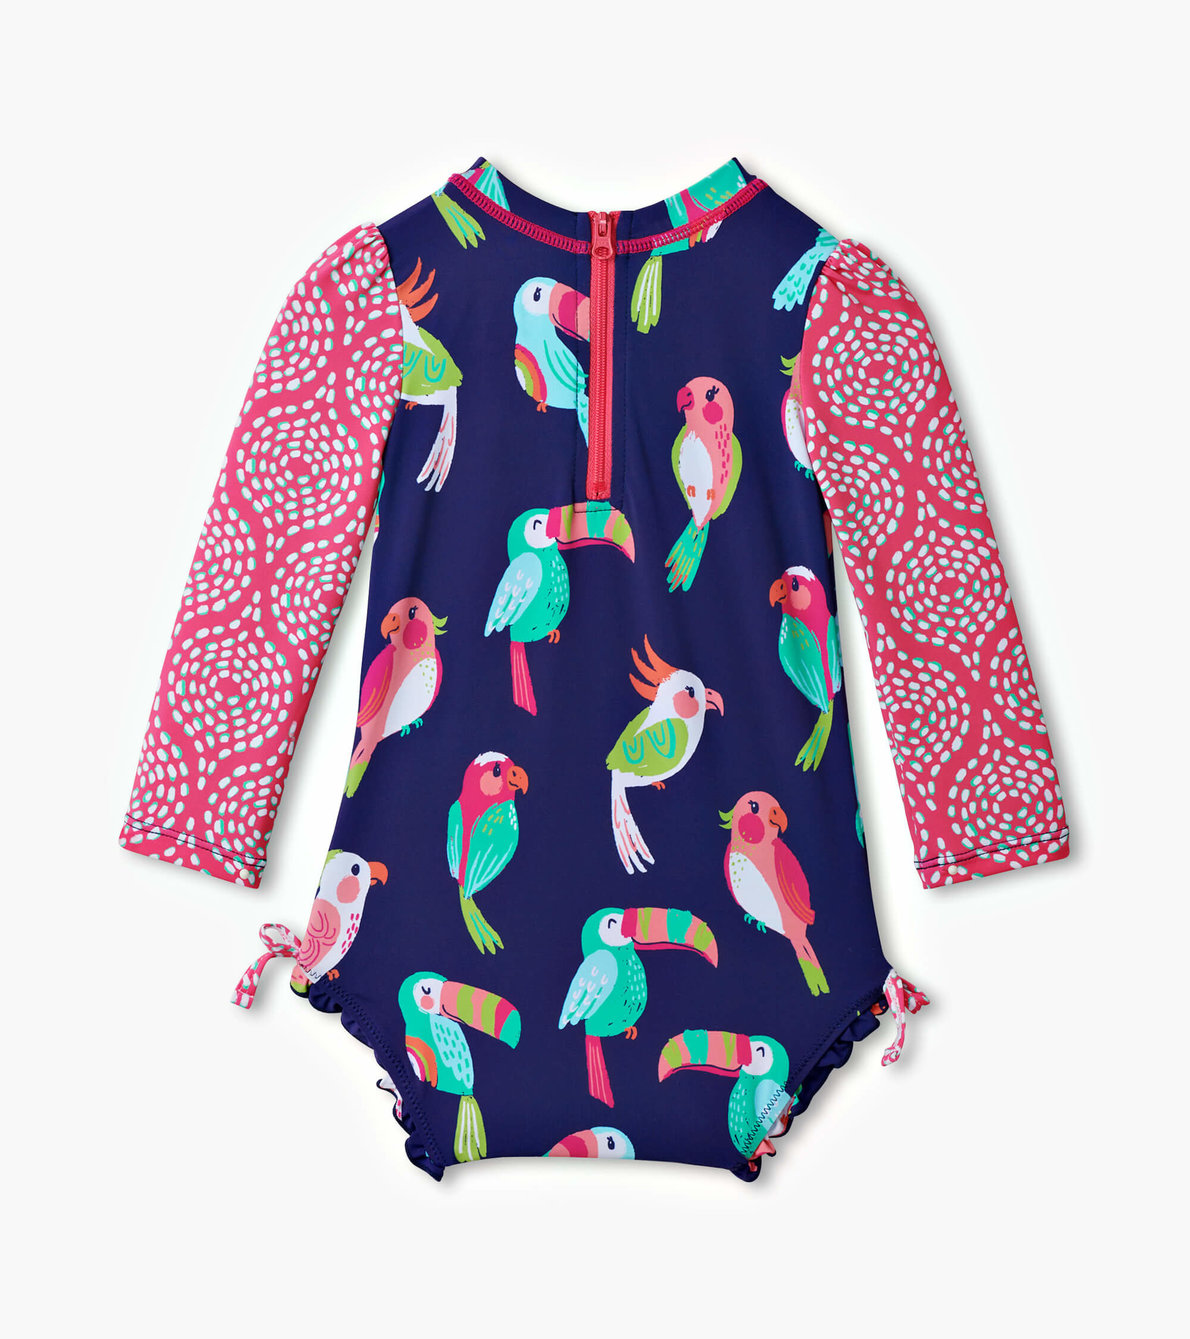 View larger image of Tropical Birds Baby Rashguard Swimsuit